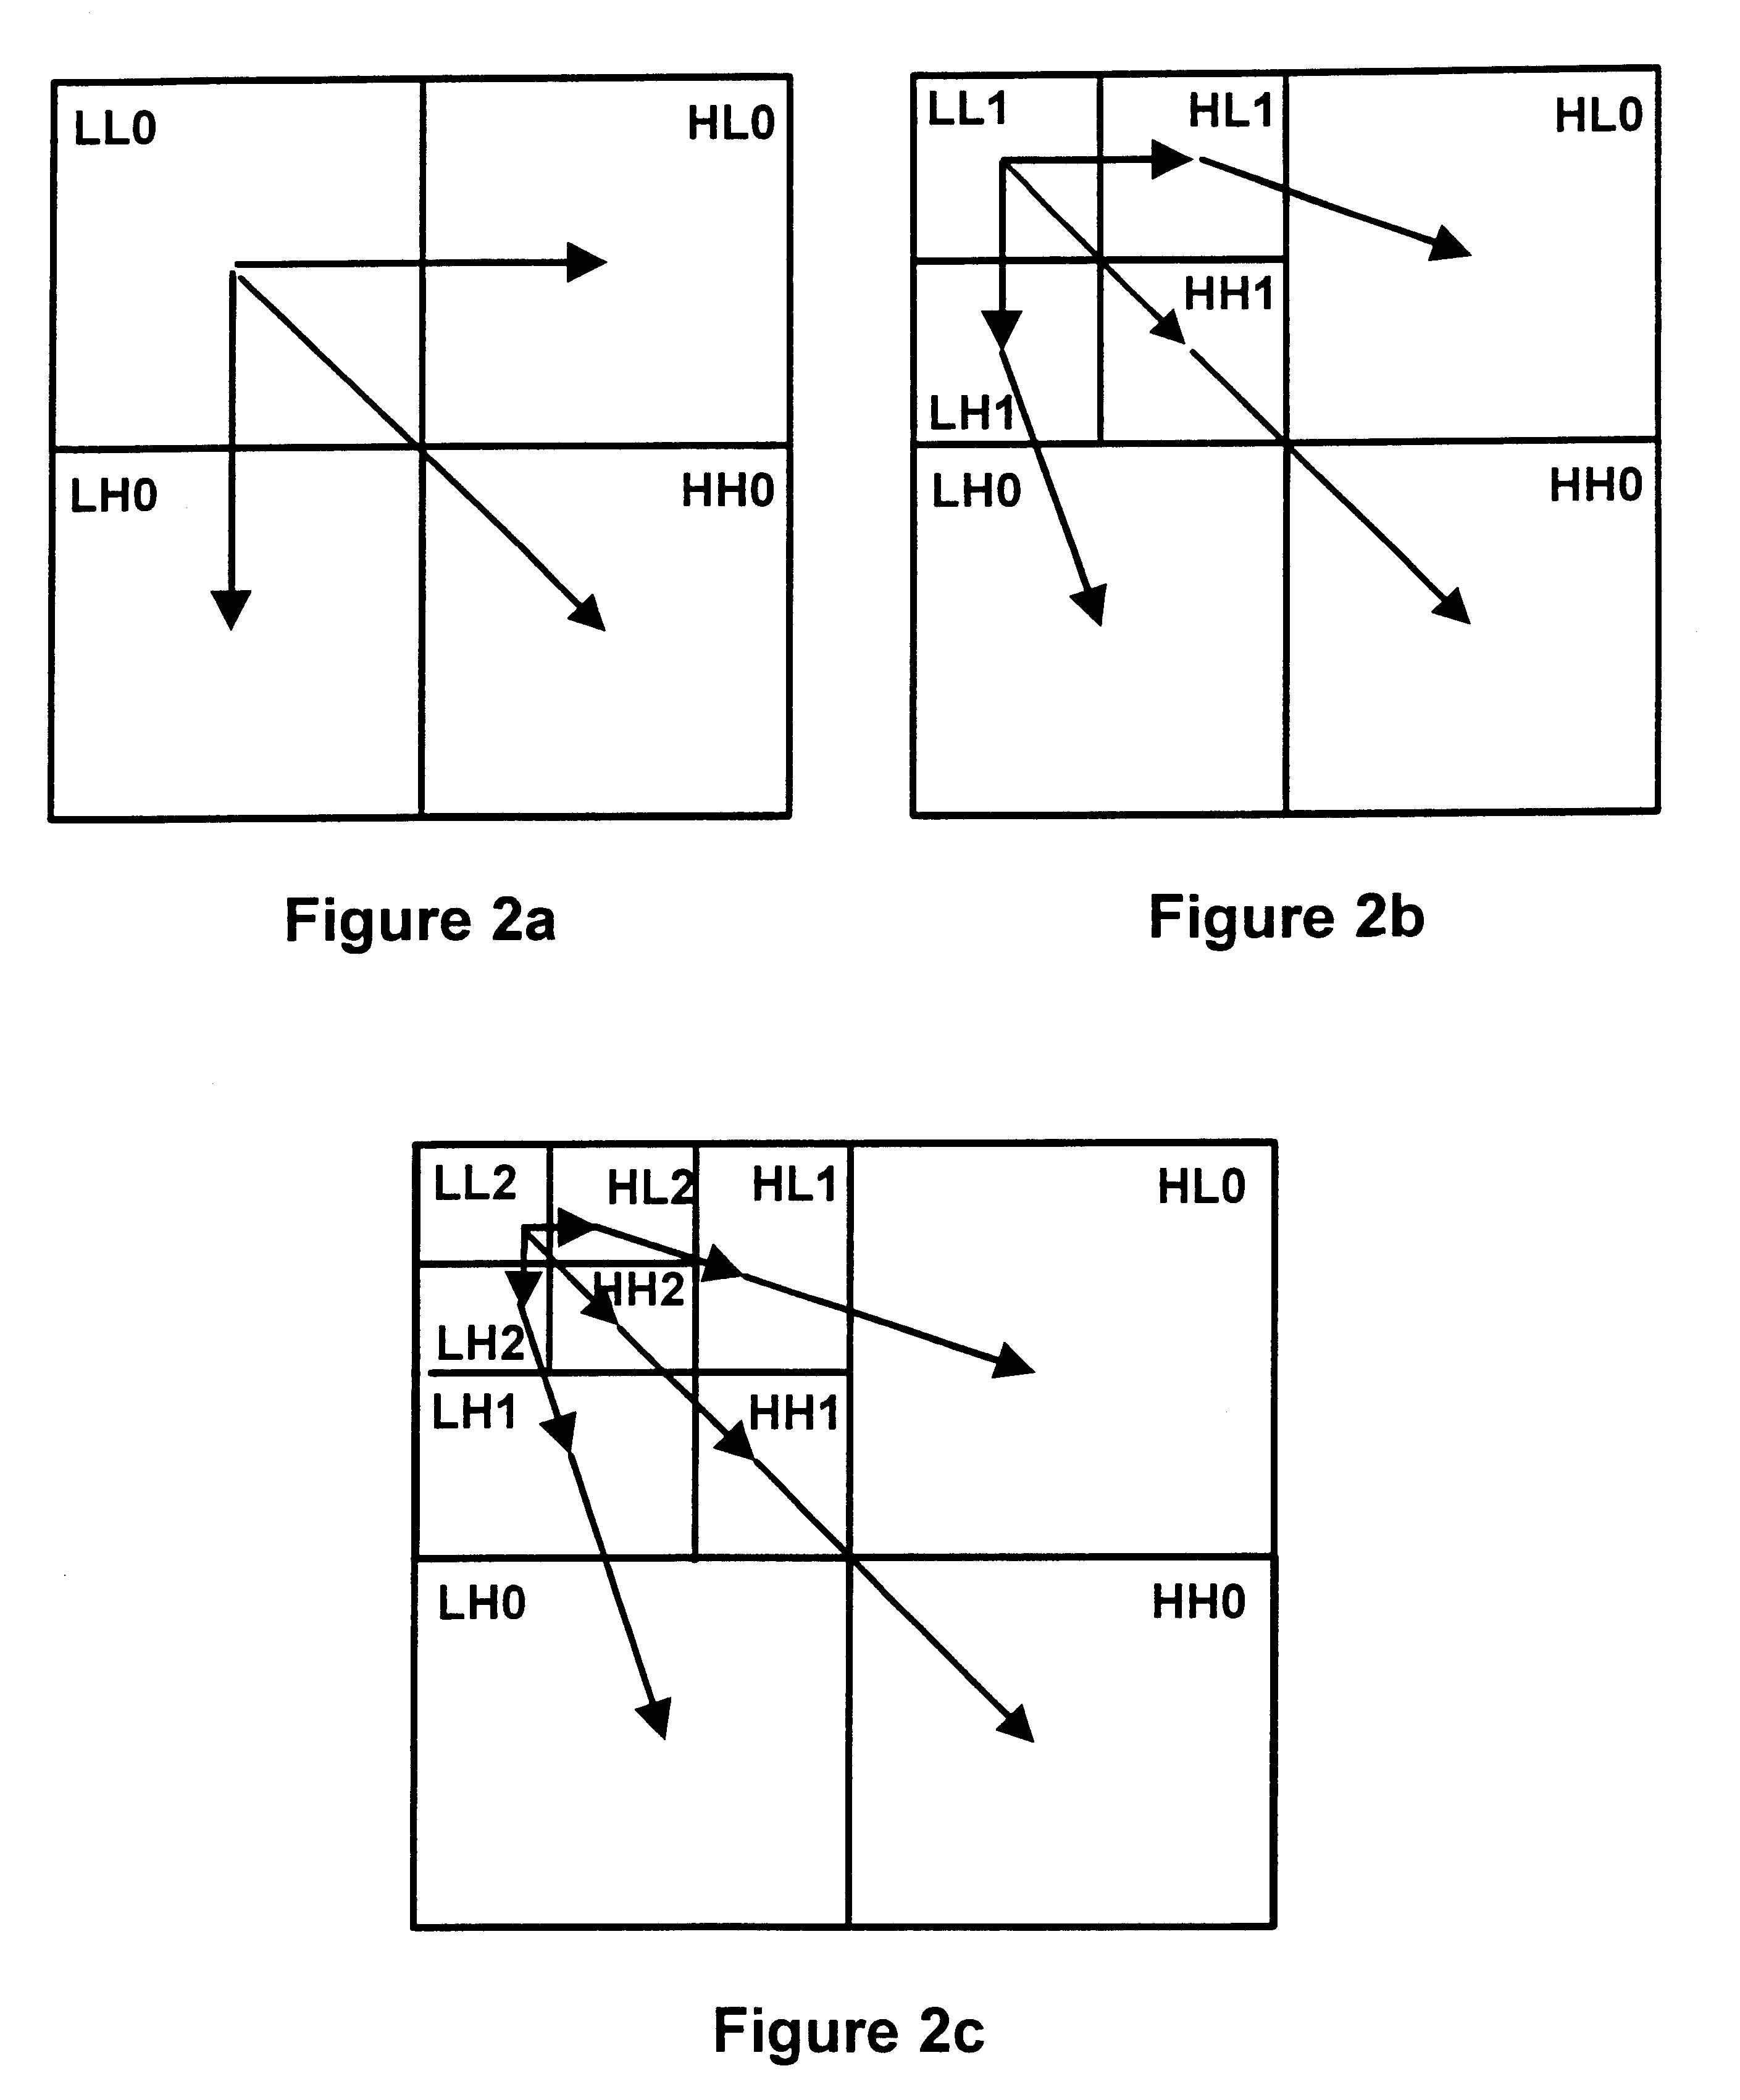 Method apparatus and system for compressing data that wavelet decomposes by color plane and then divides by magnitude range non-dc terms between a scalar quantizer and a vector quantizer